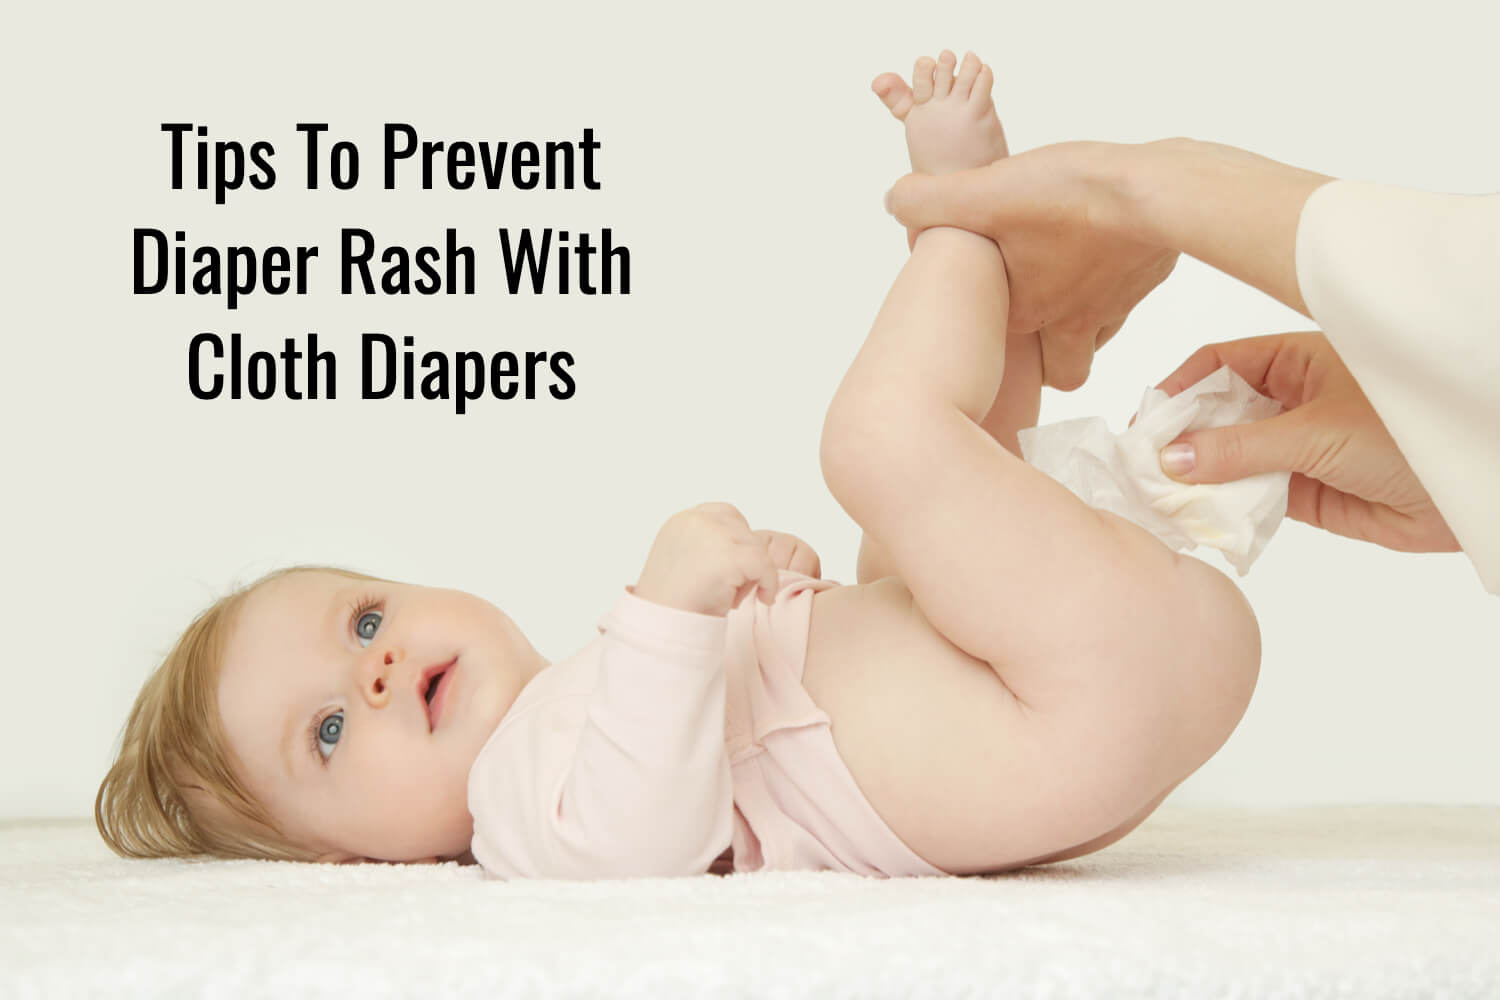 Diaper rash with cloth diapers